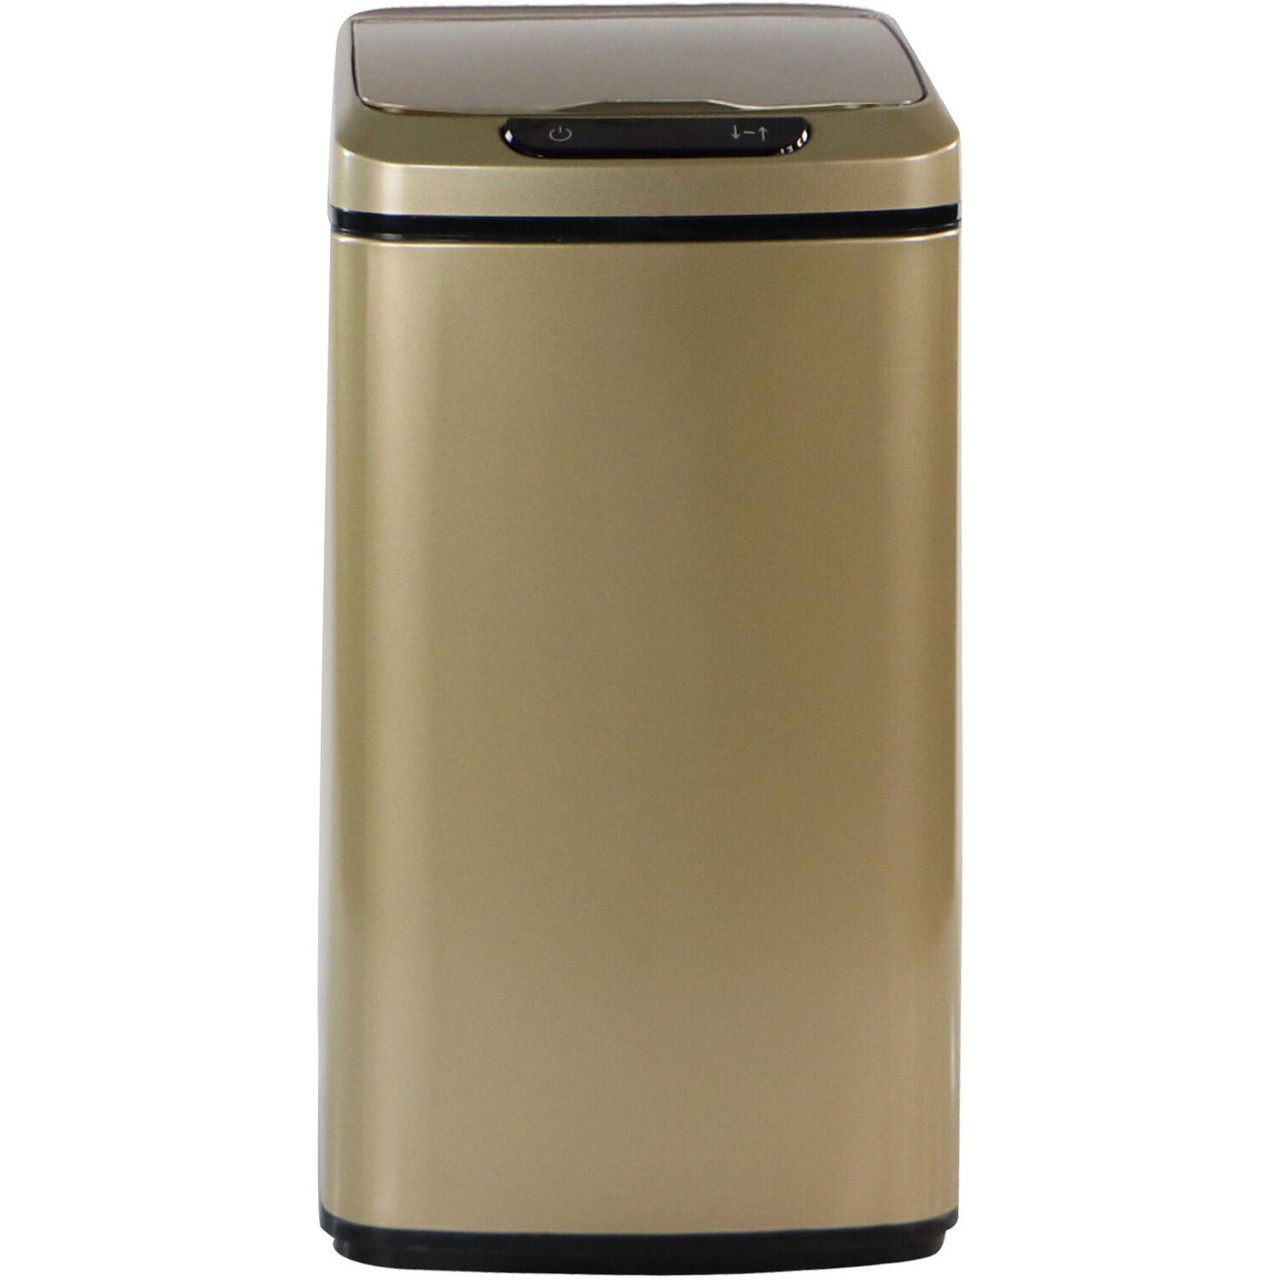 Side-Entry Trash Can - 9 Gallon, Stainless Steel